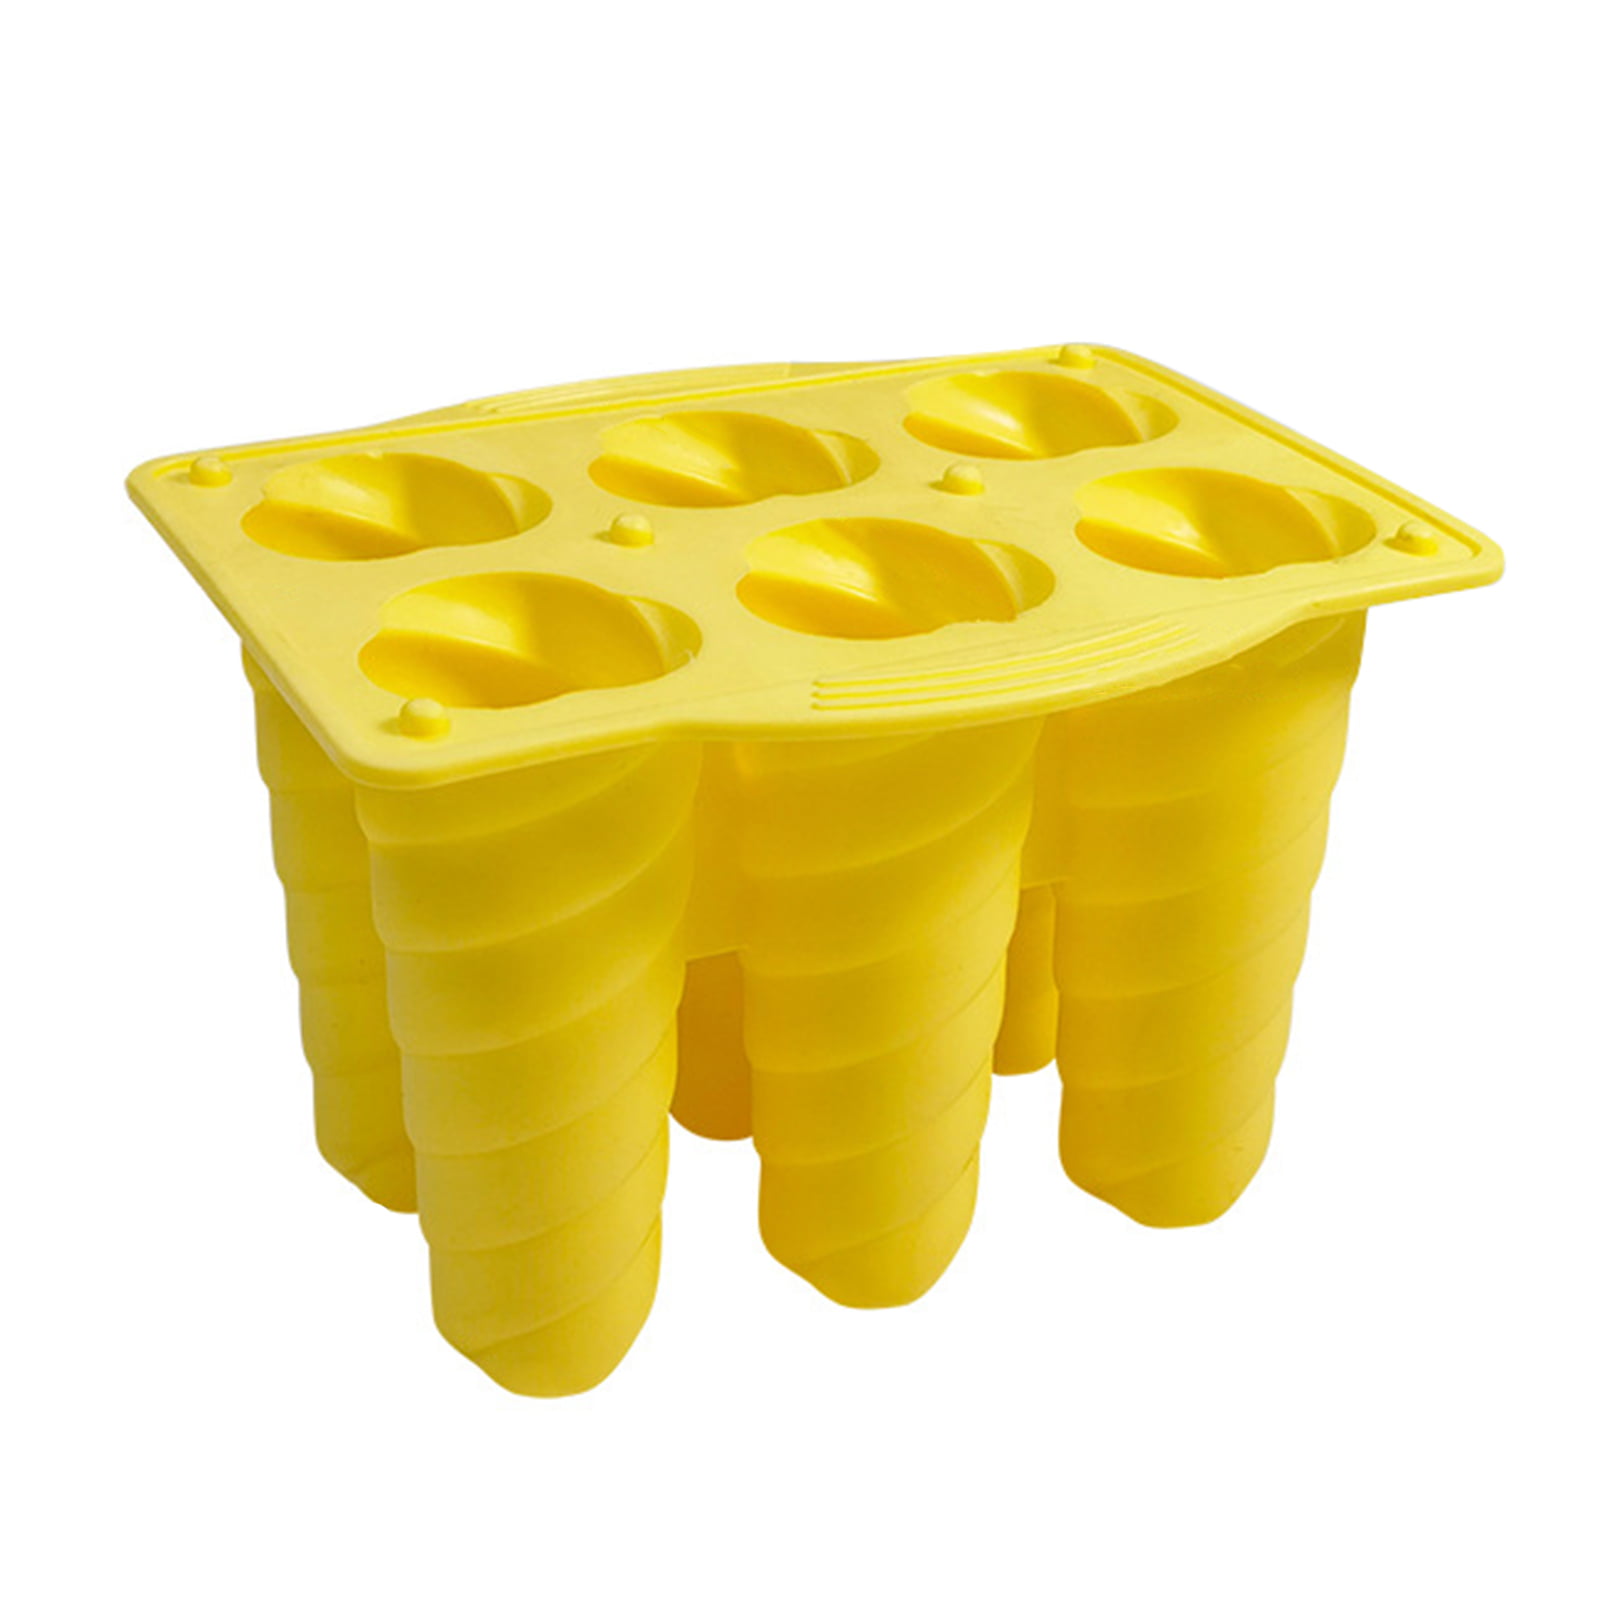 Details about   DIY Ice Cream Popsicle Mould Silicone Tray Lolly Mould Frozen Yogurt 4 Grids New 